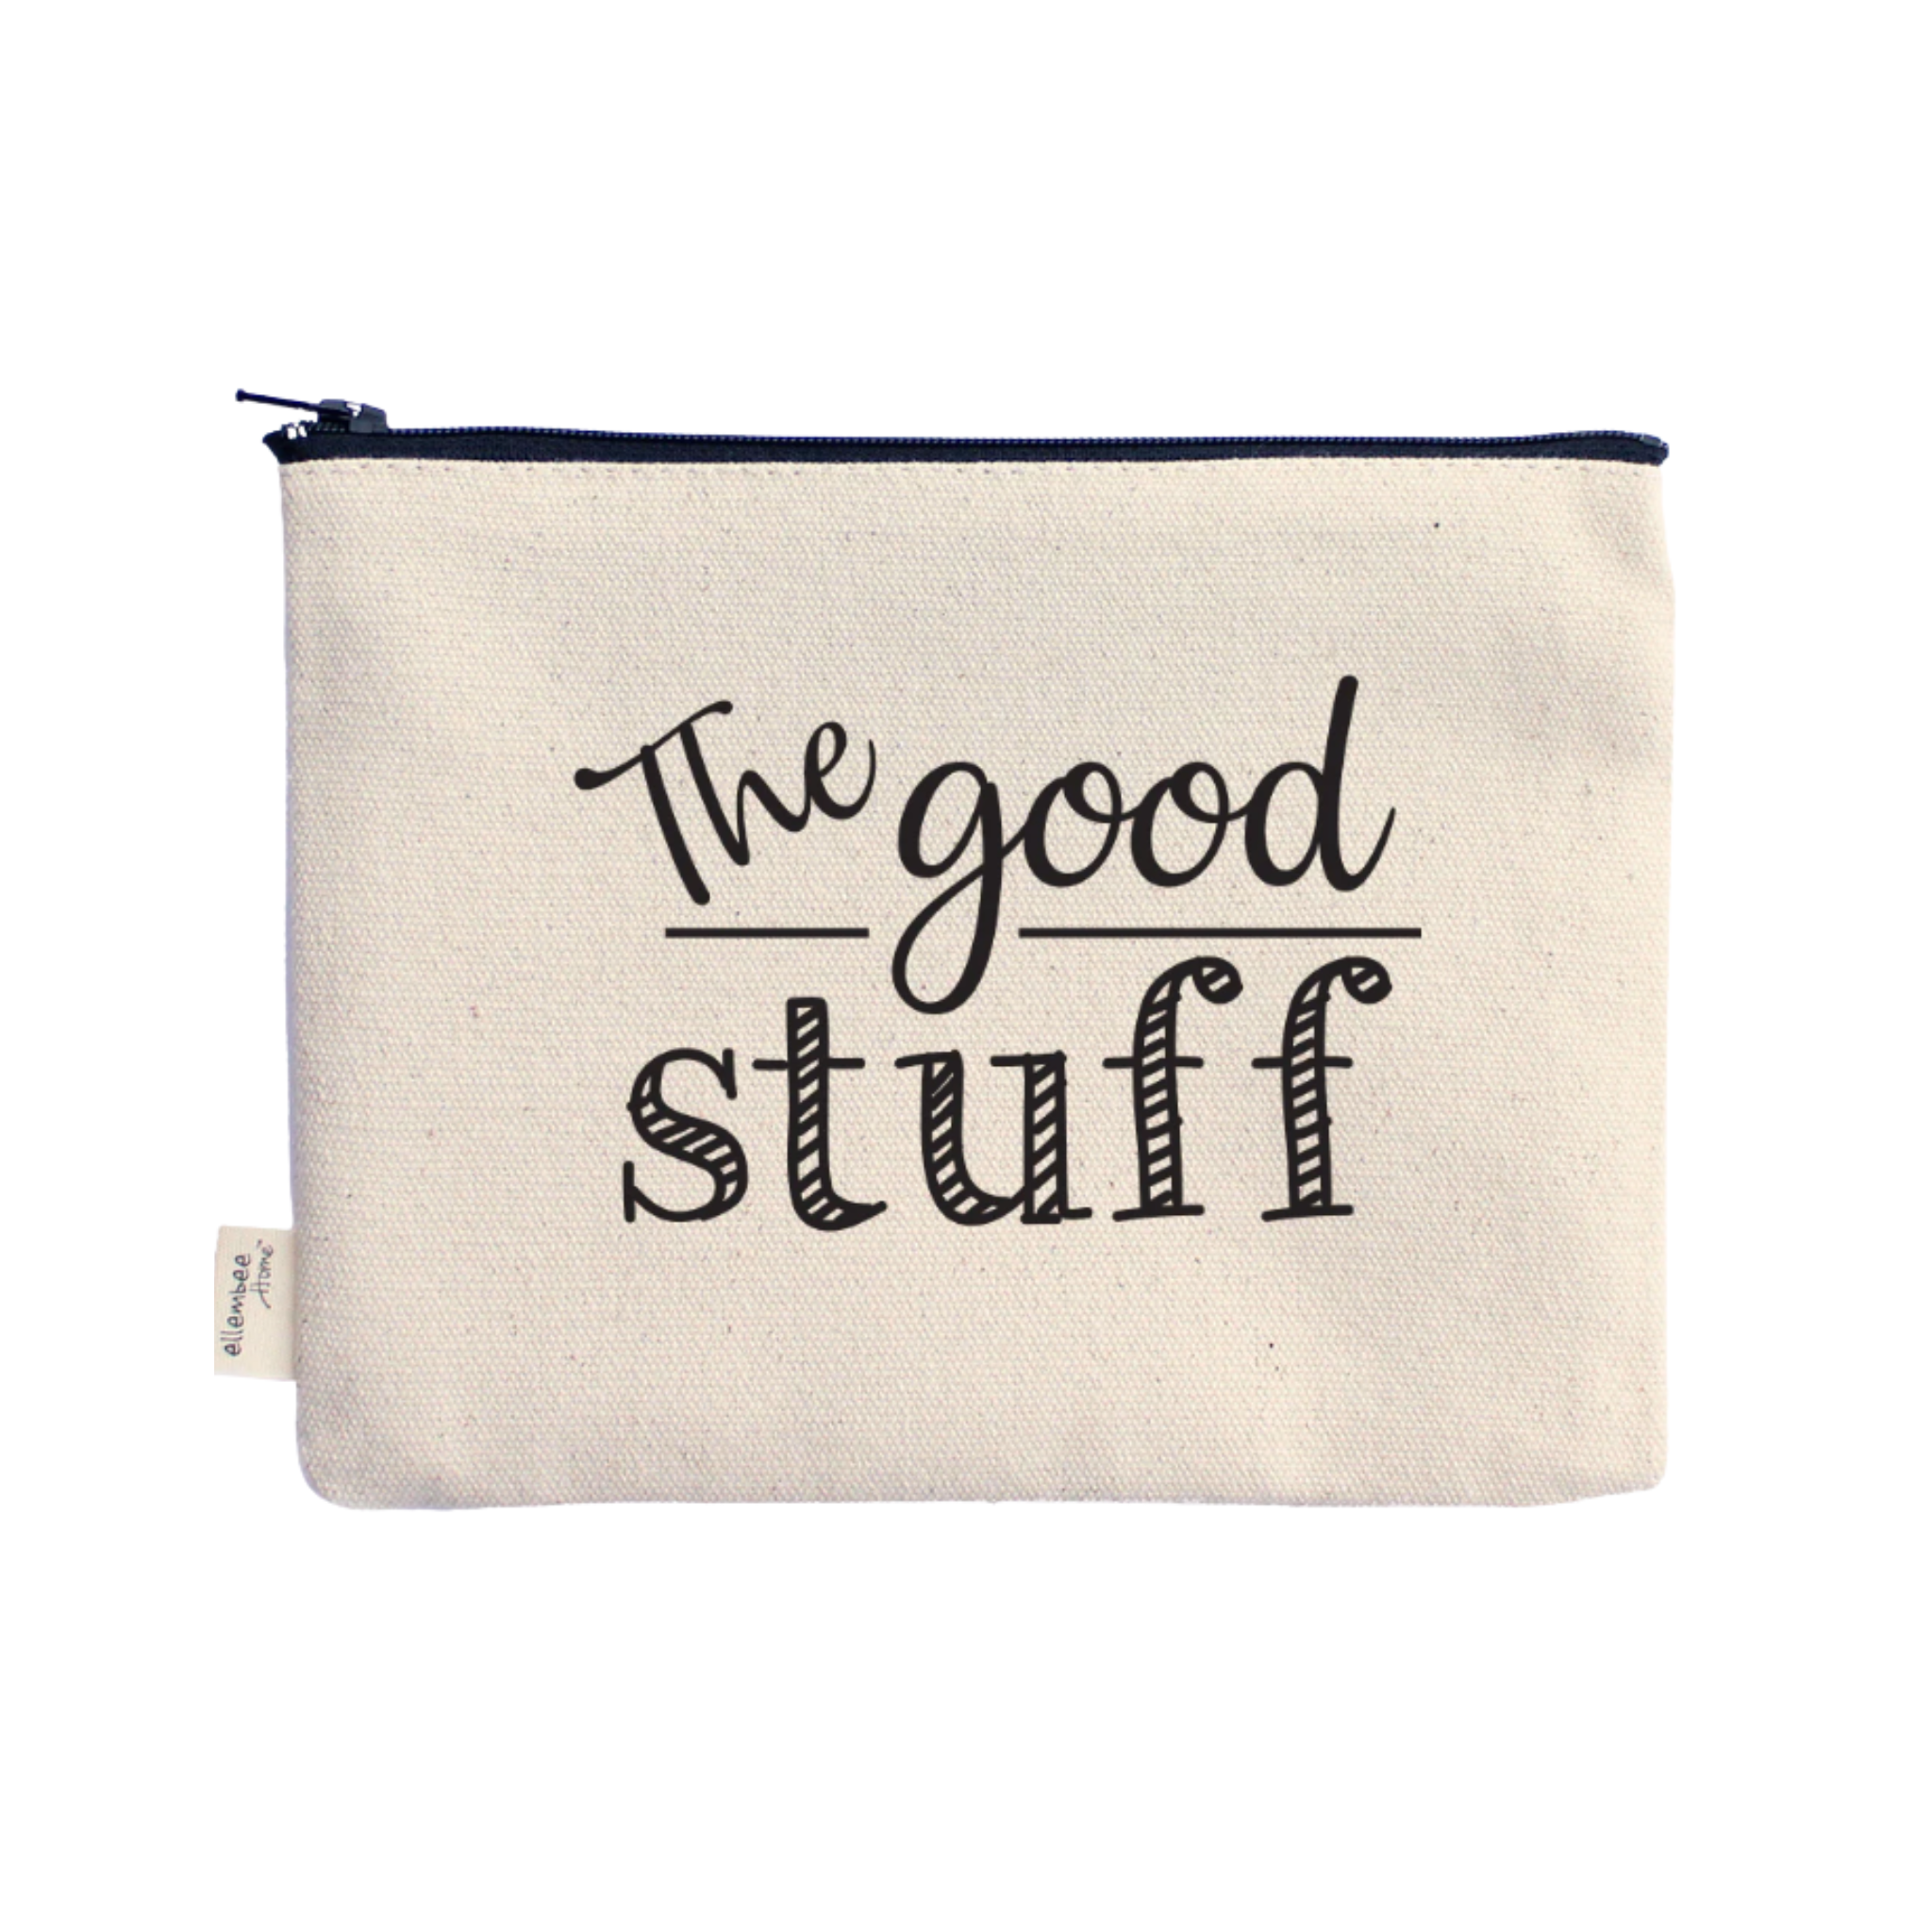 Ellembee "the good stuff" Pouch